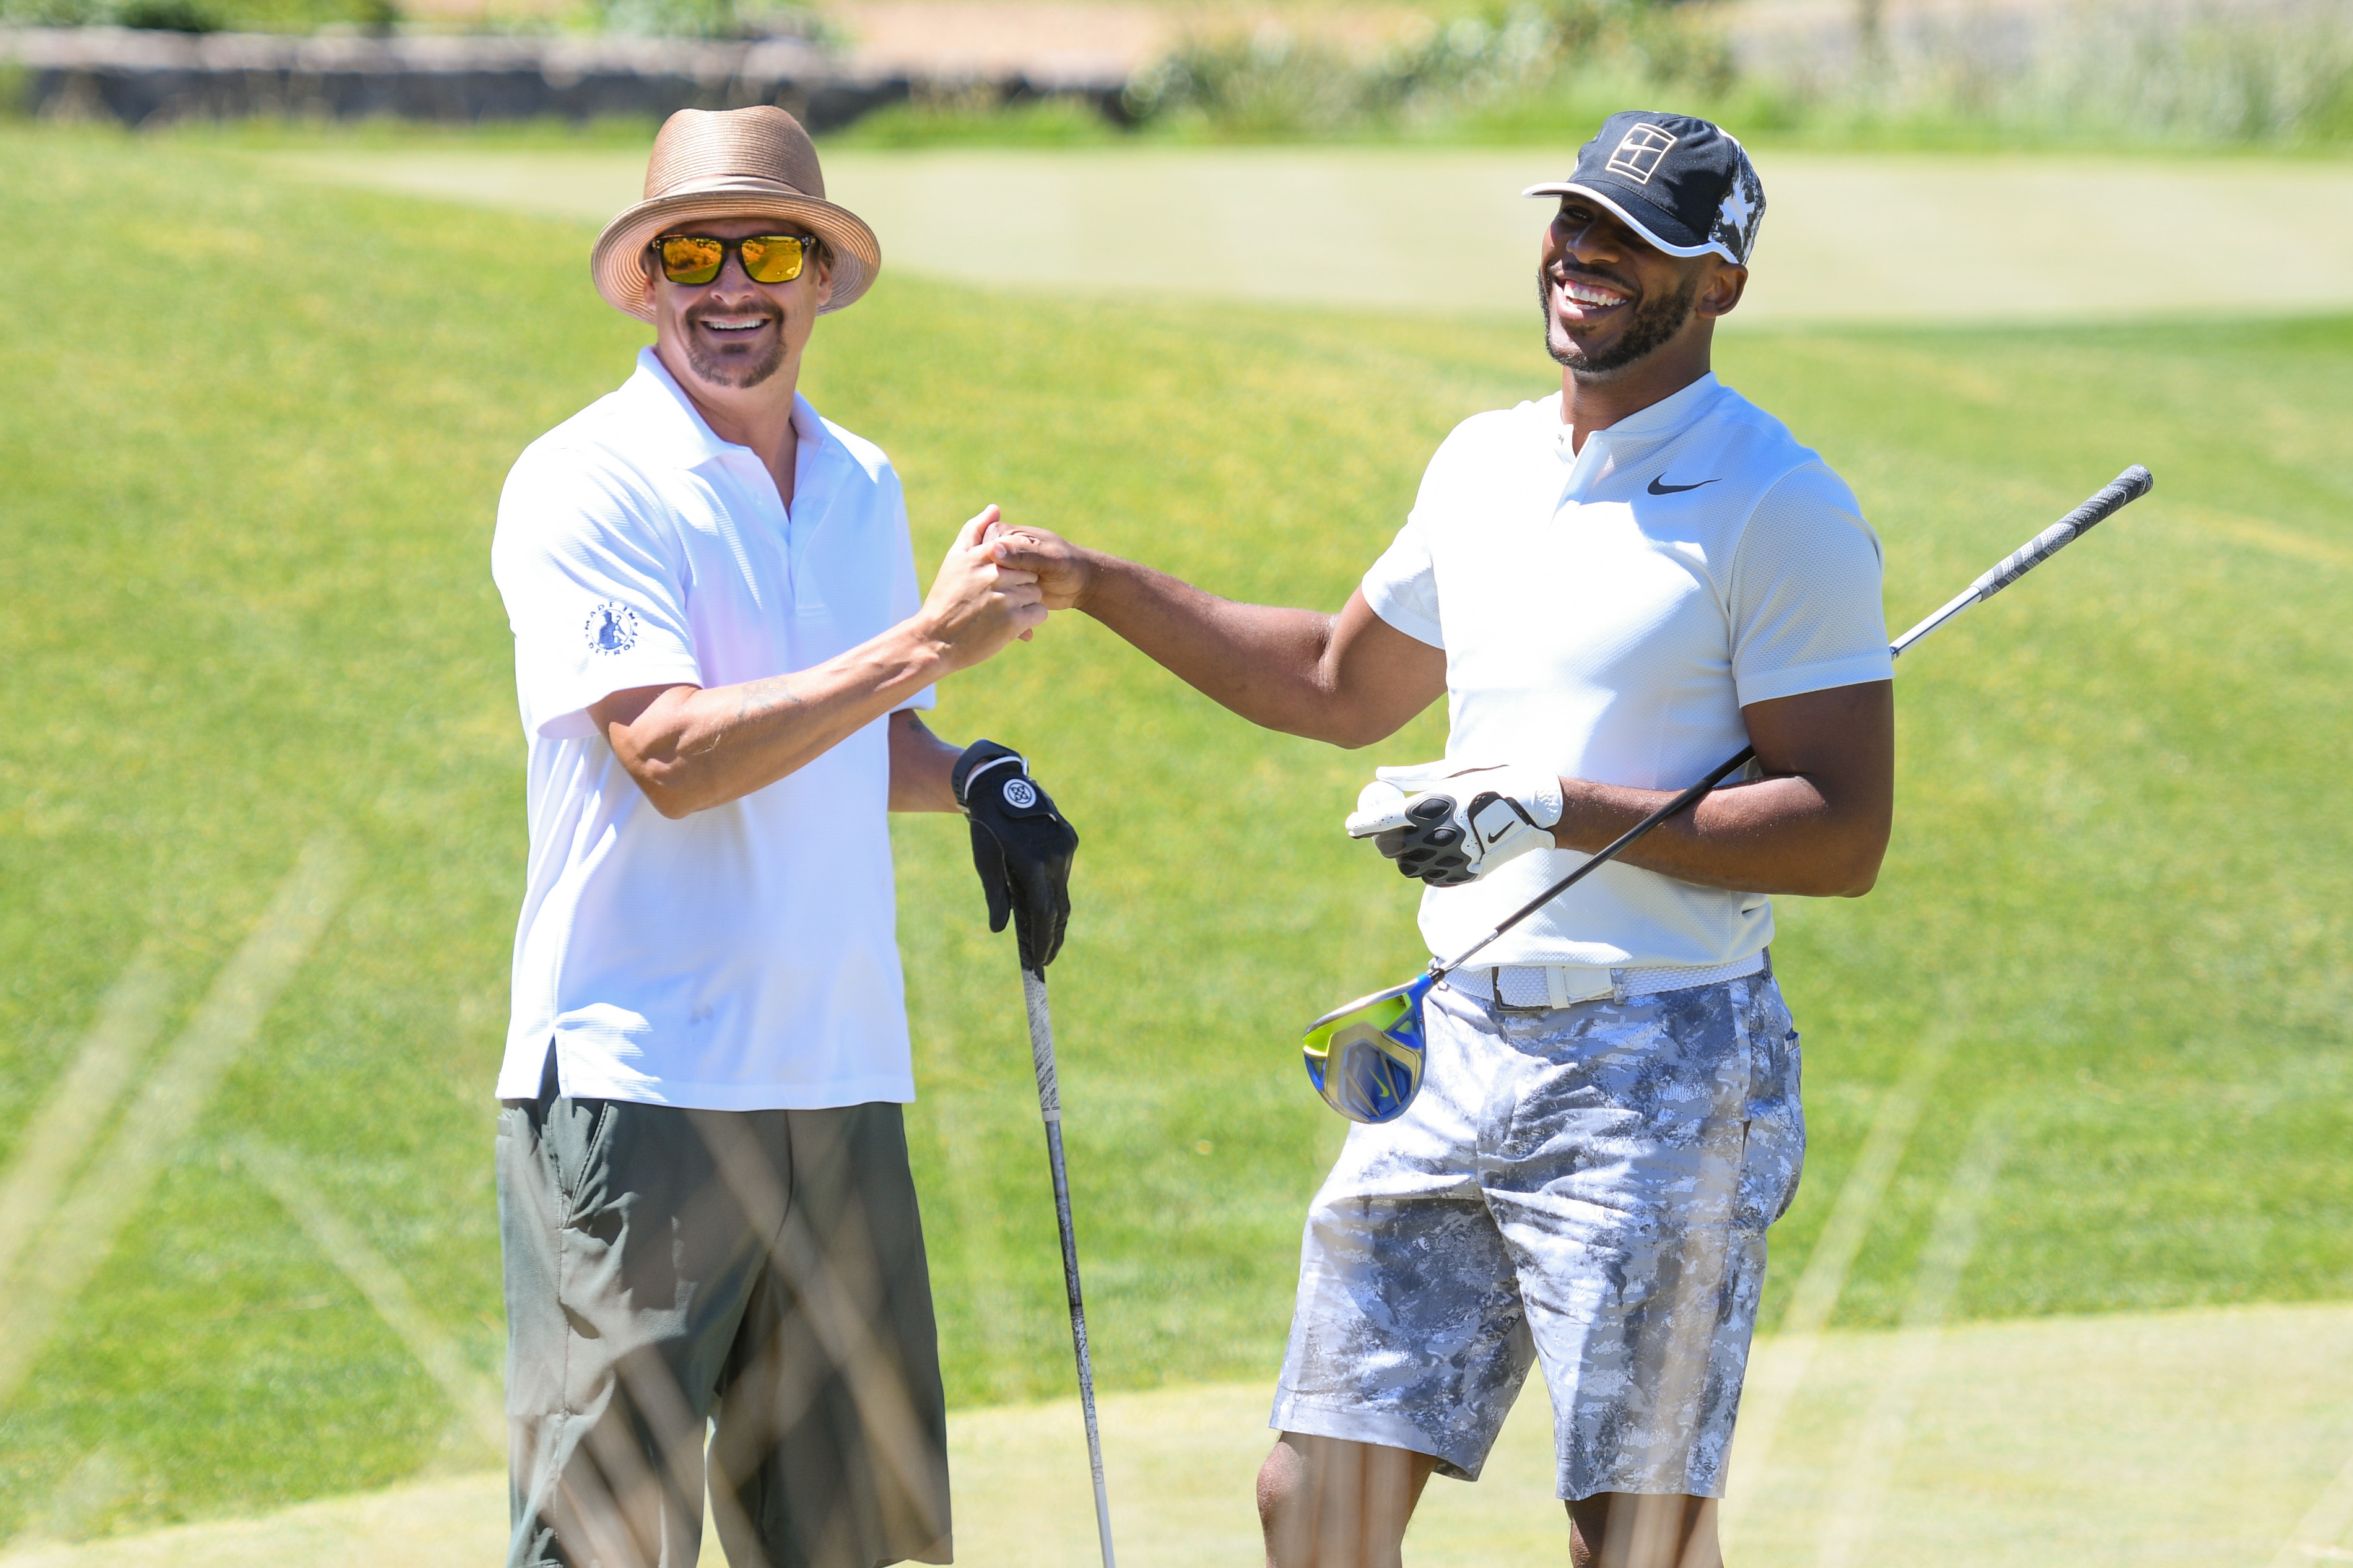 Kid Rock and Chris Paul playing a round of golf at Shadow Creek